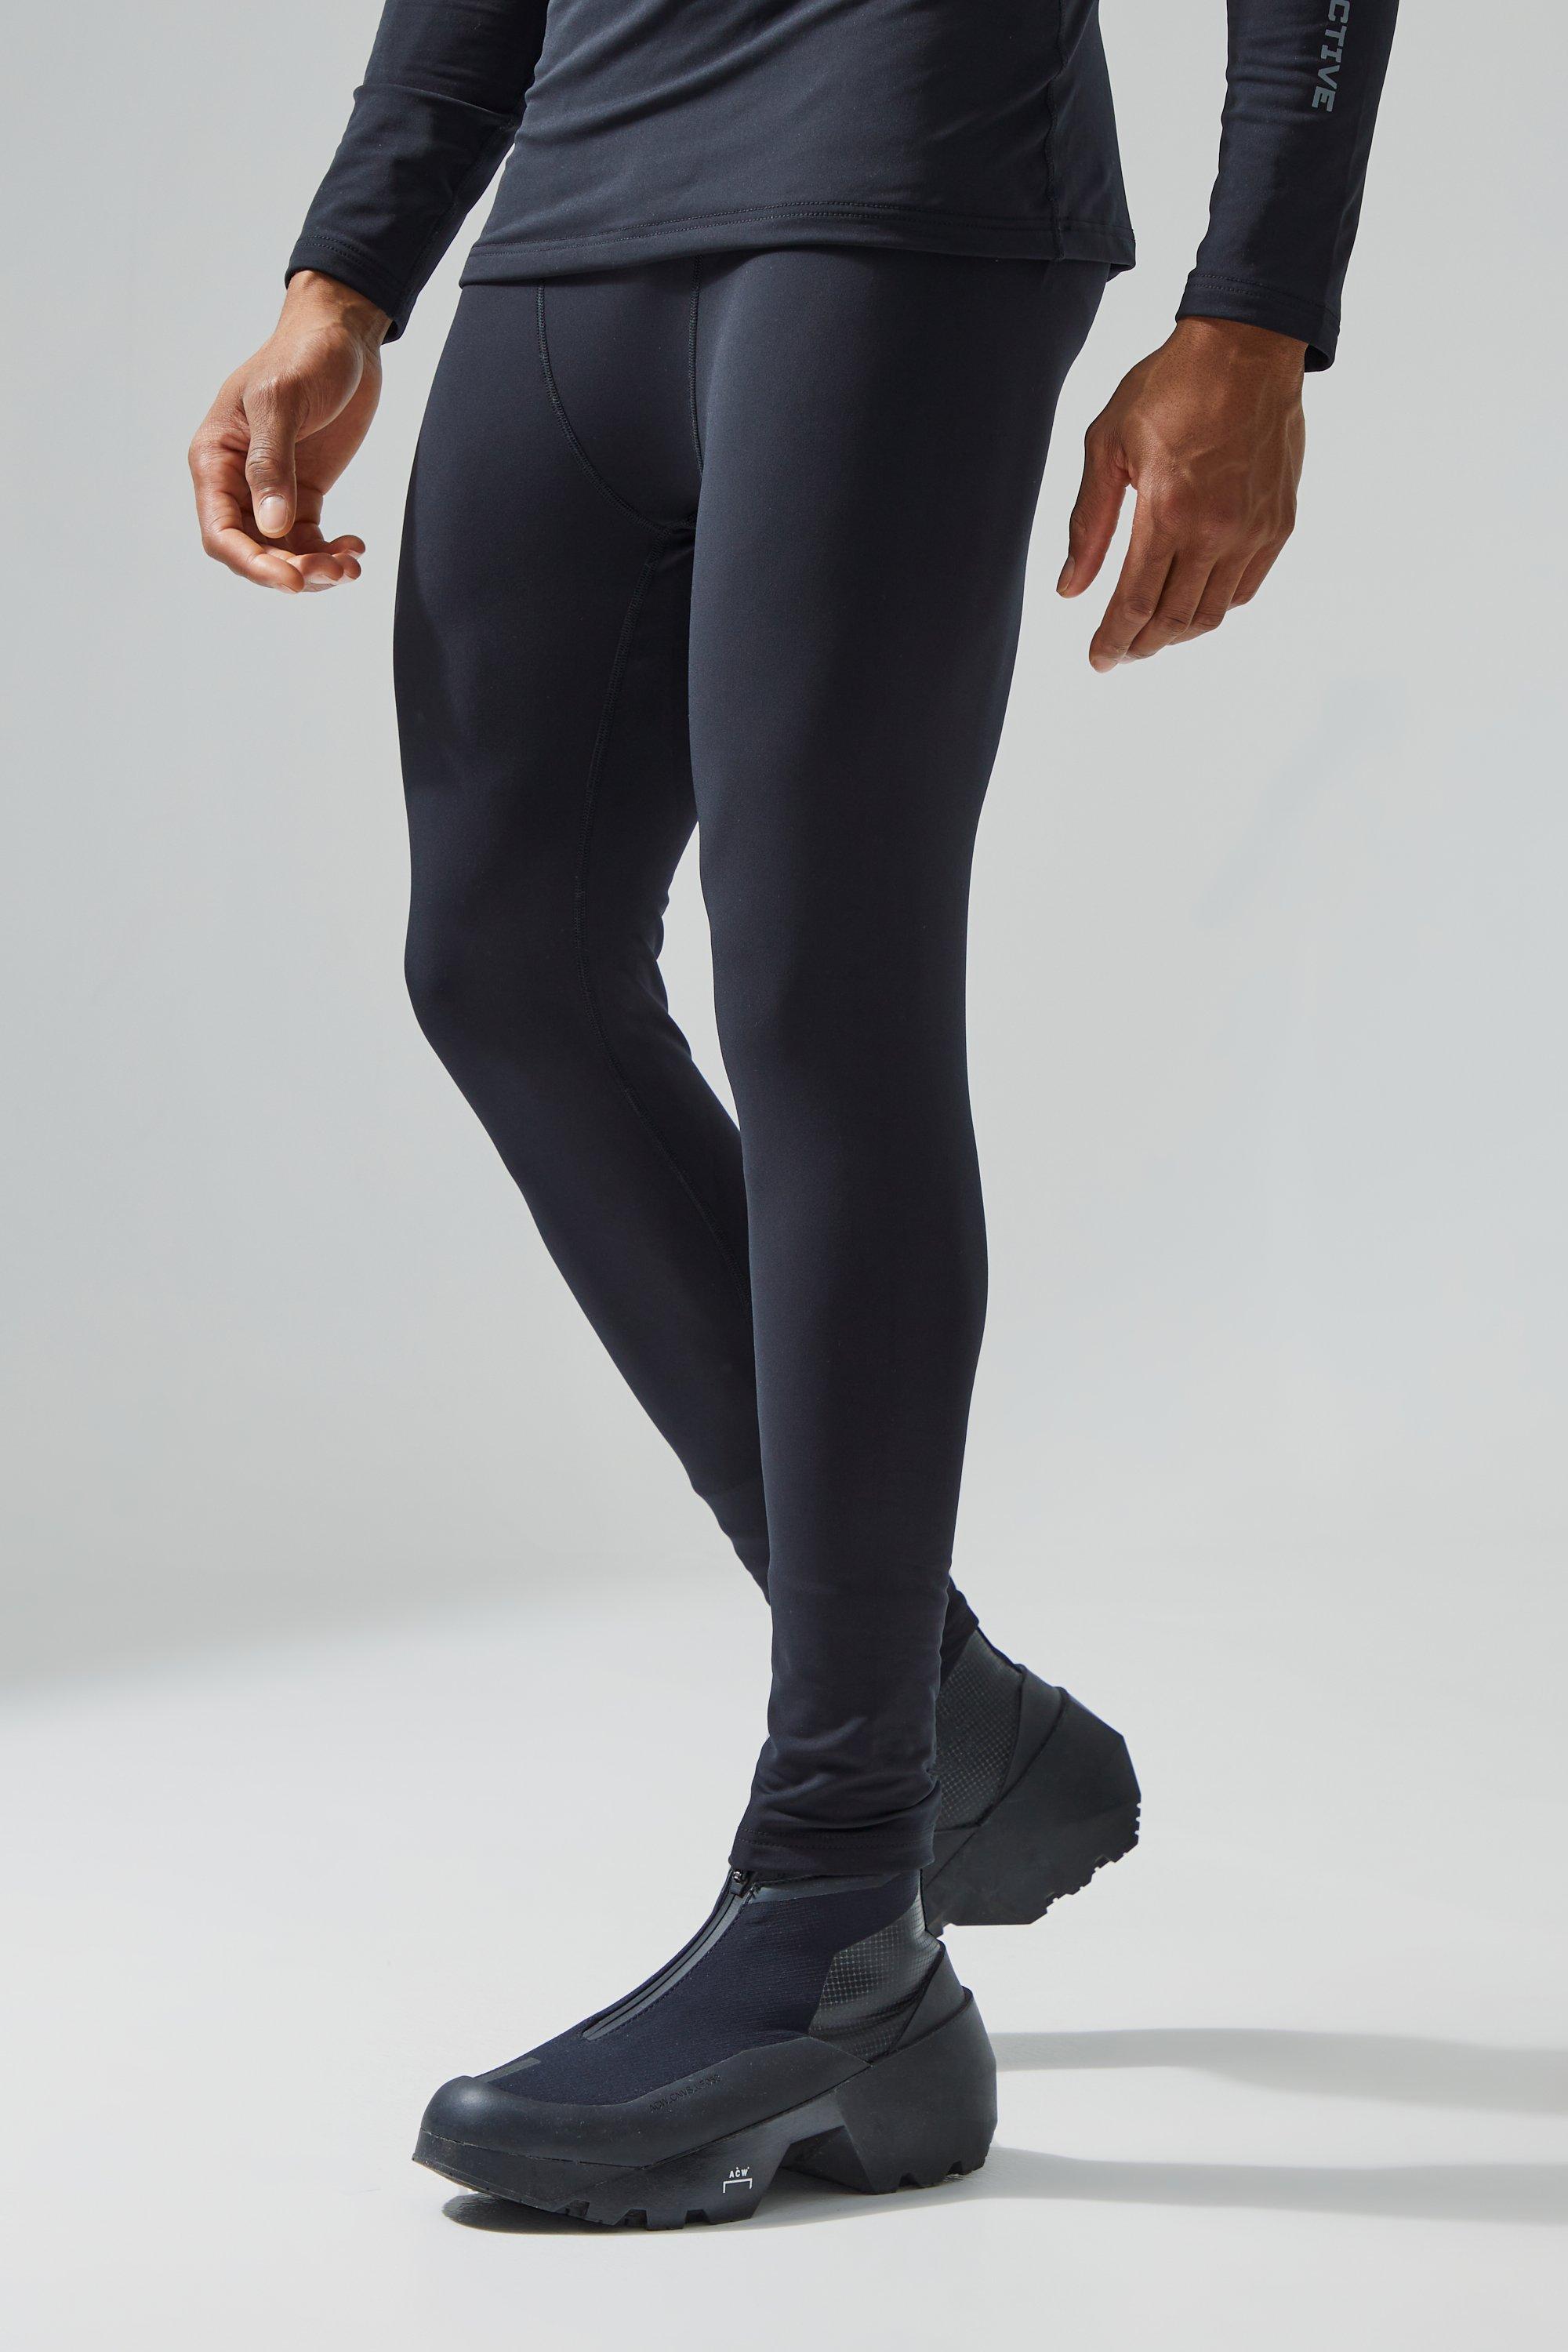 Boohoo Leggings for Women, Online Sale up to 80% off